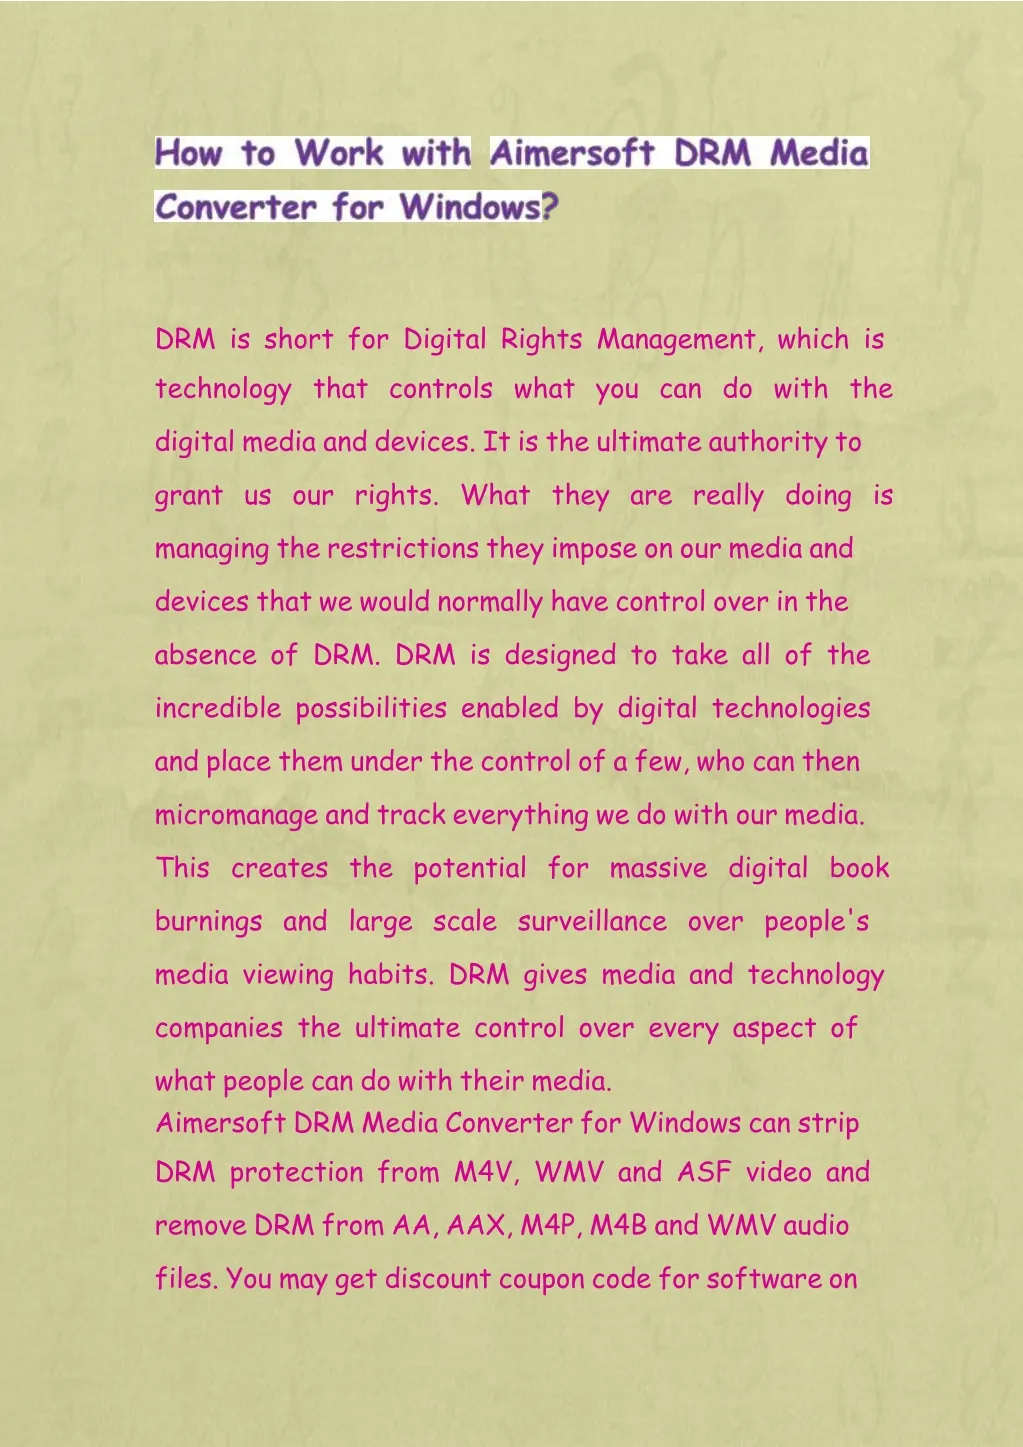 drm is short for digital rights management which